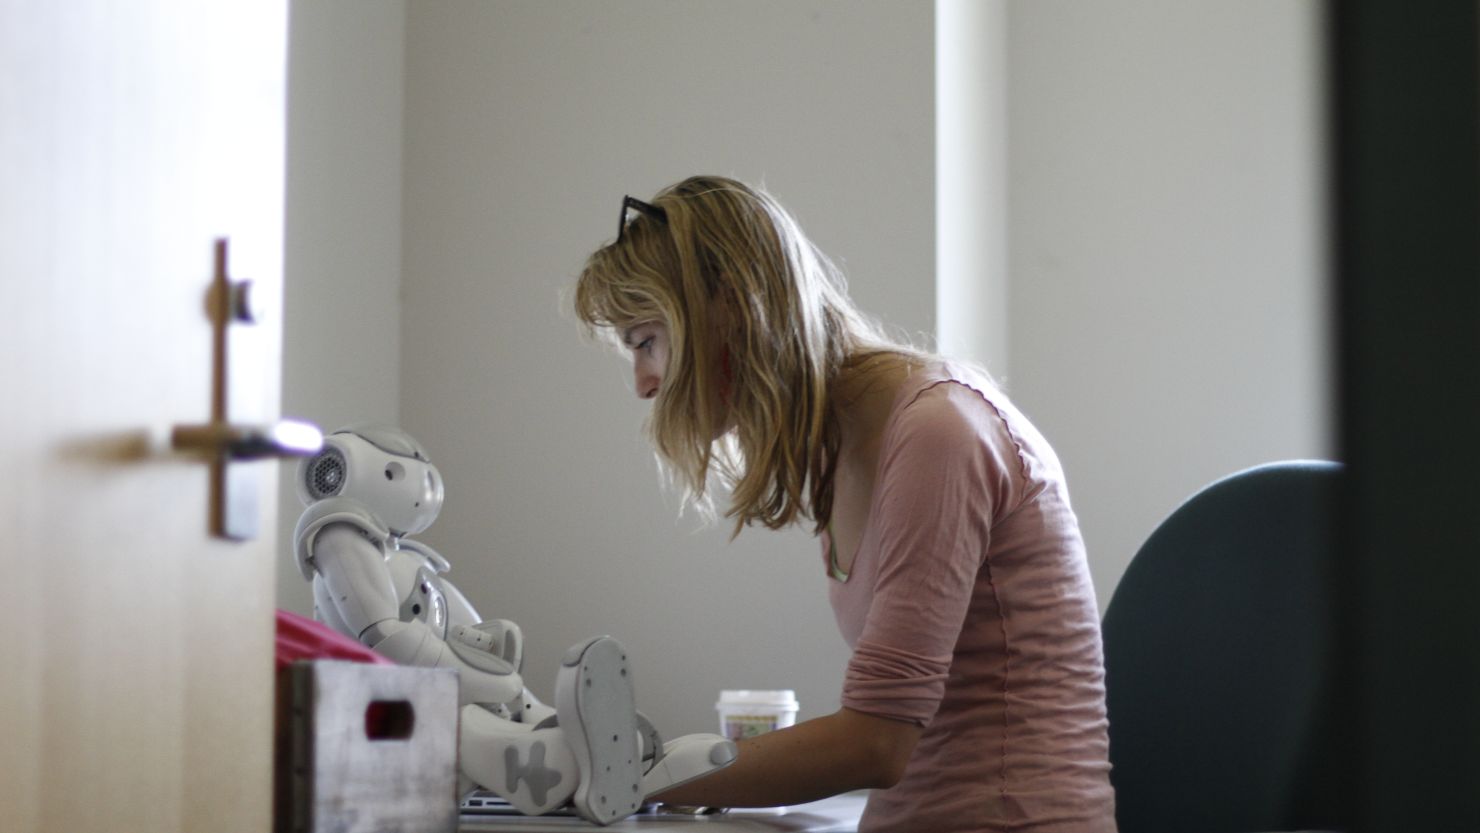 Heather Knight, who specializes in social robotics, sees the robot Data as a way of investigating her area of study.